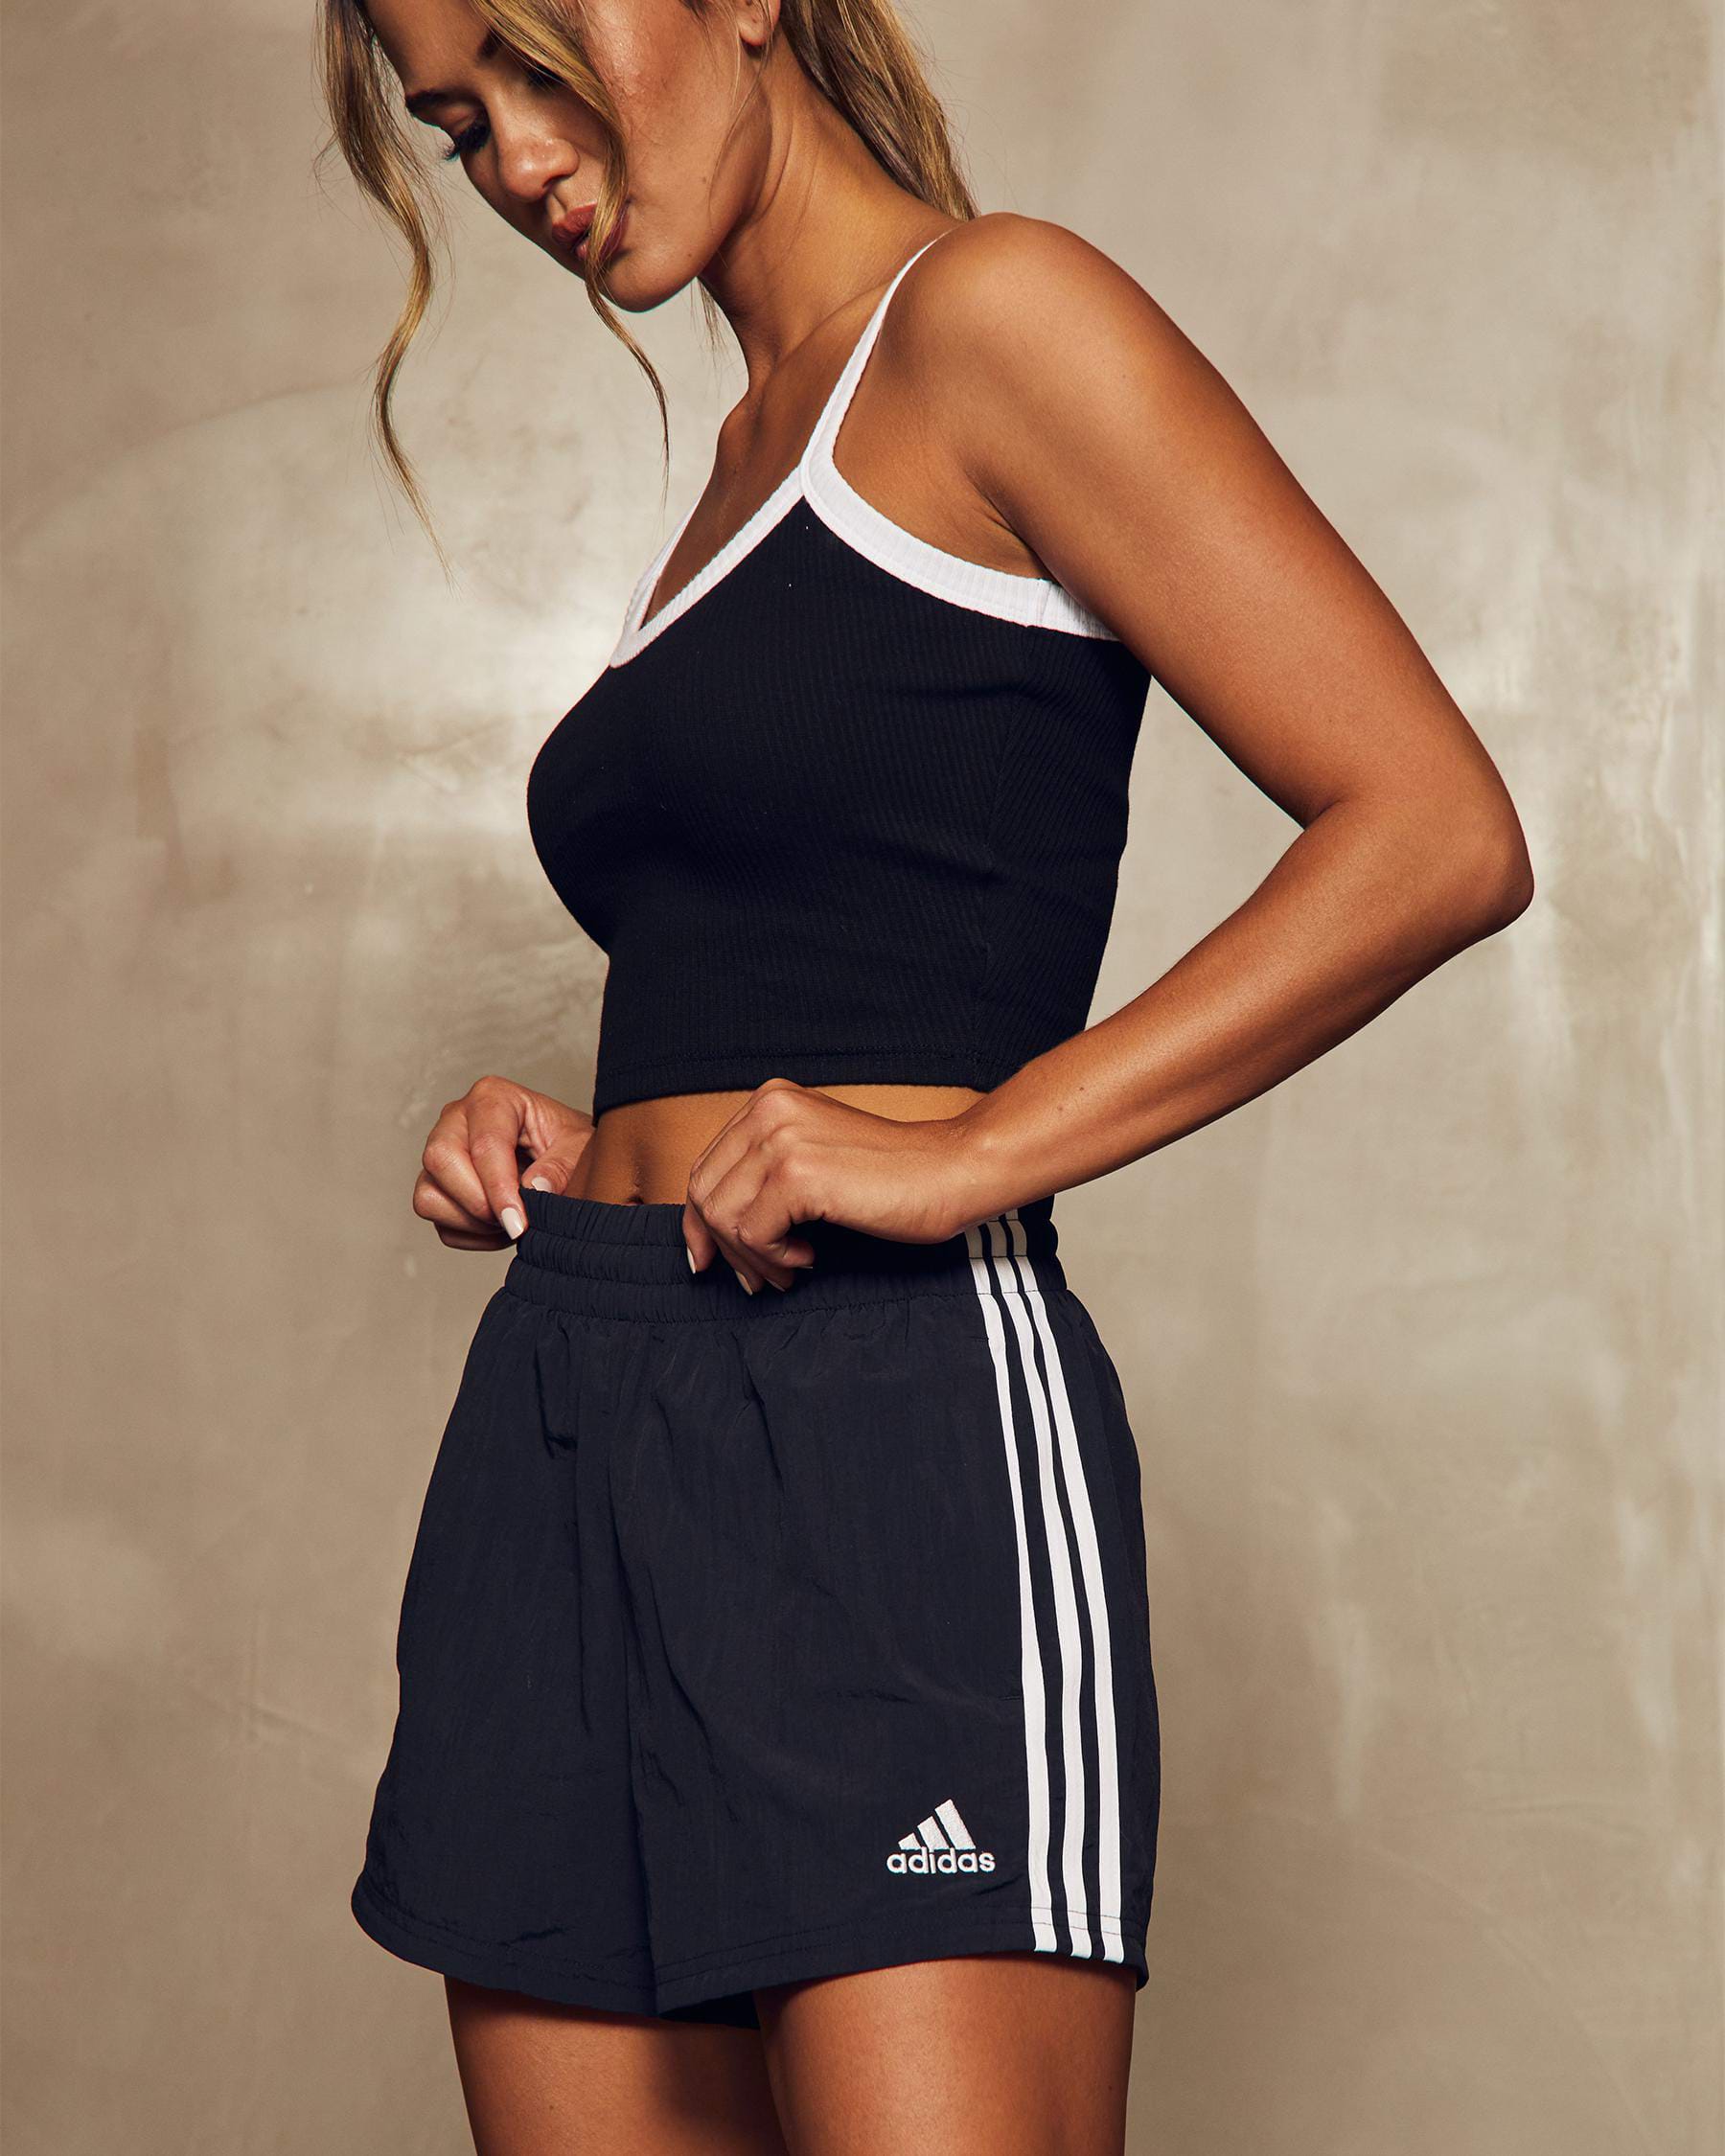 Adidas Essentials Stripe Shorts Shipping Beach Black/white Woven - City - United In & FREE* Returns States 3 Easy